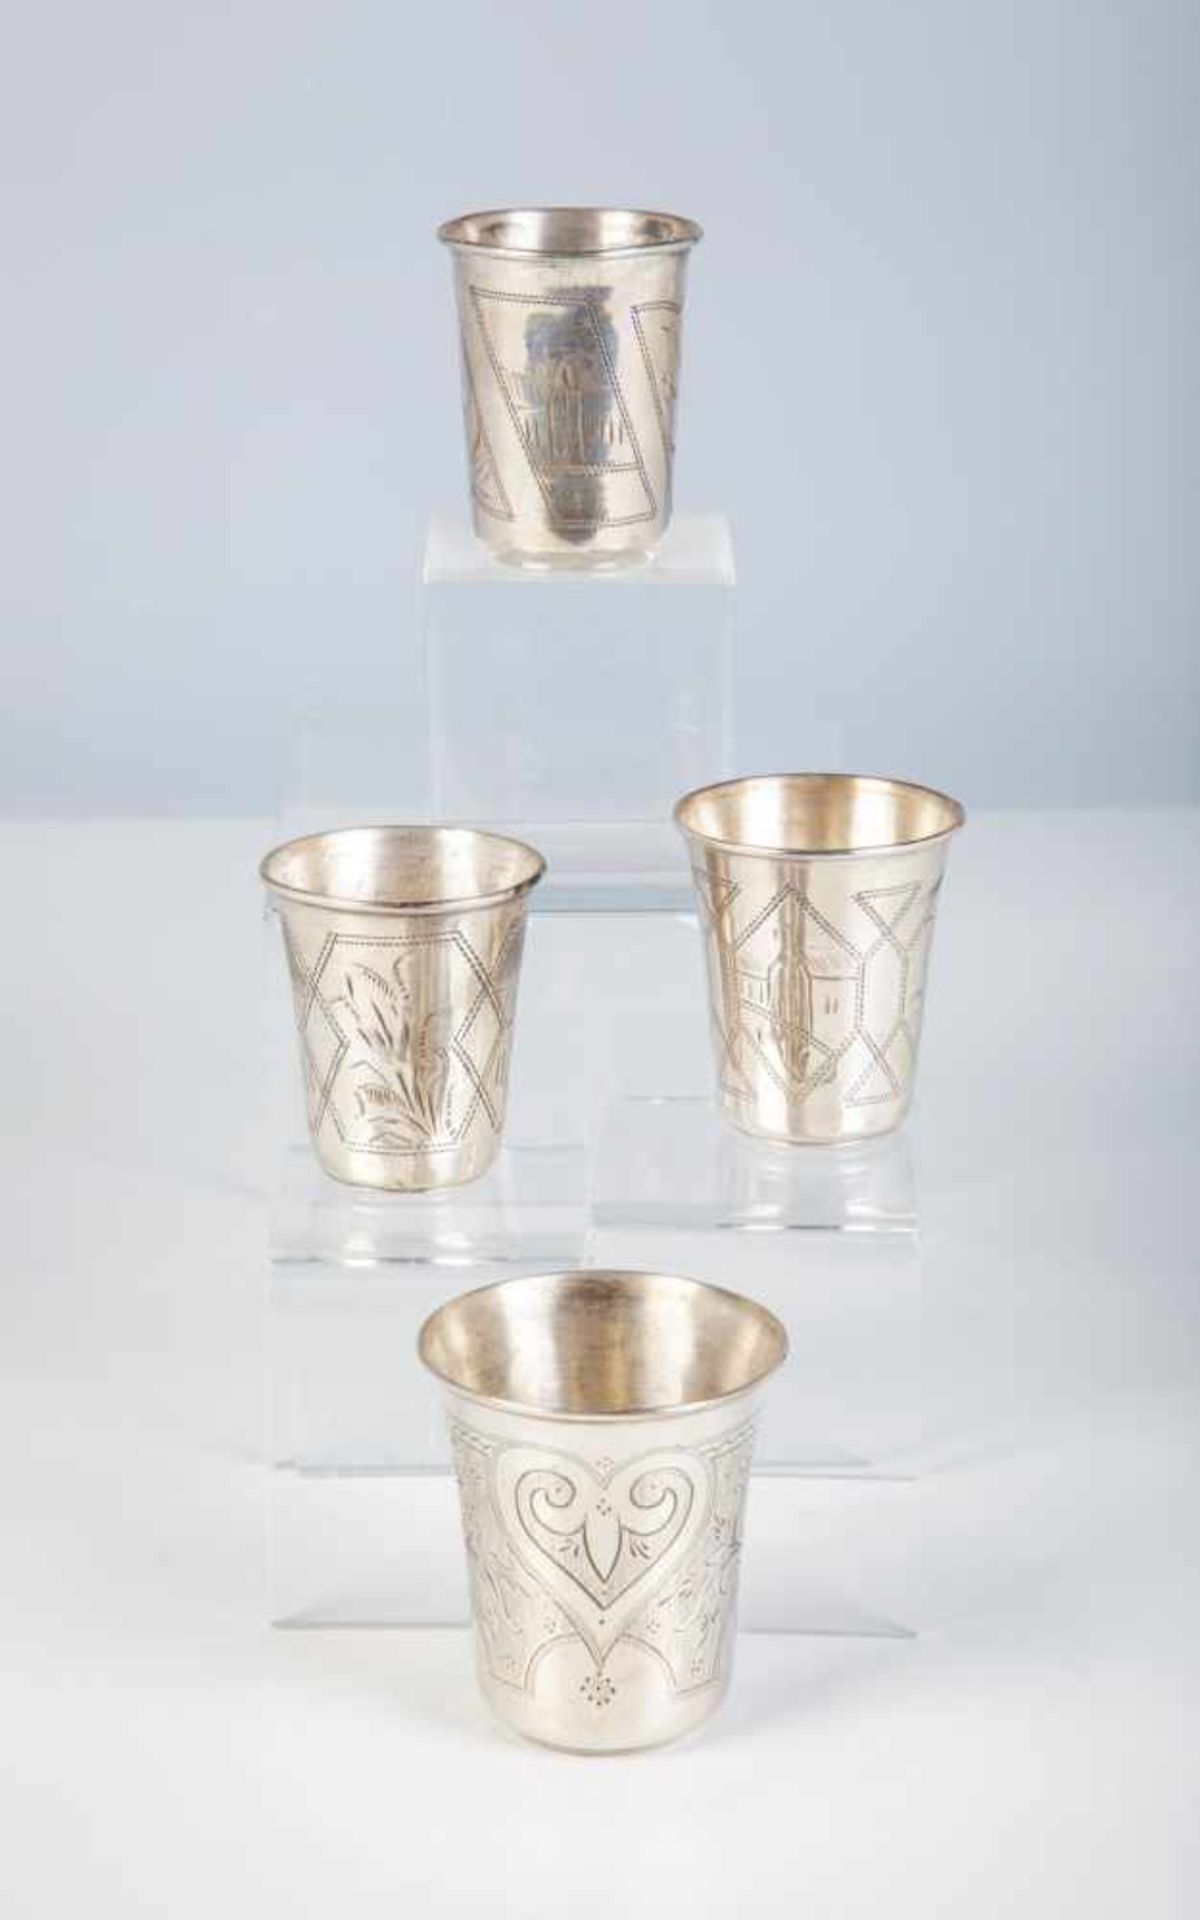 Four silver beakers. Russia, 1868 (one), 1896-1908 (two), 1908-1917 (one). All withengraved decor.